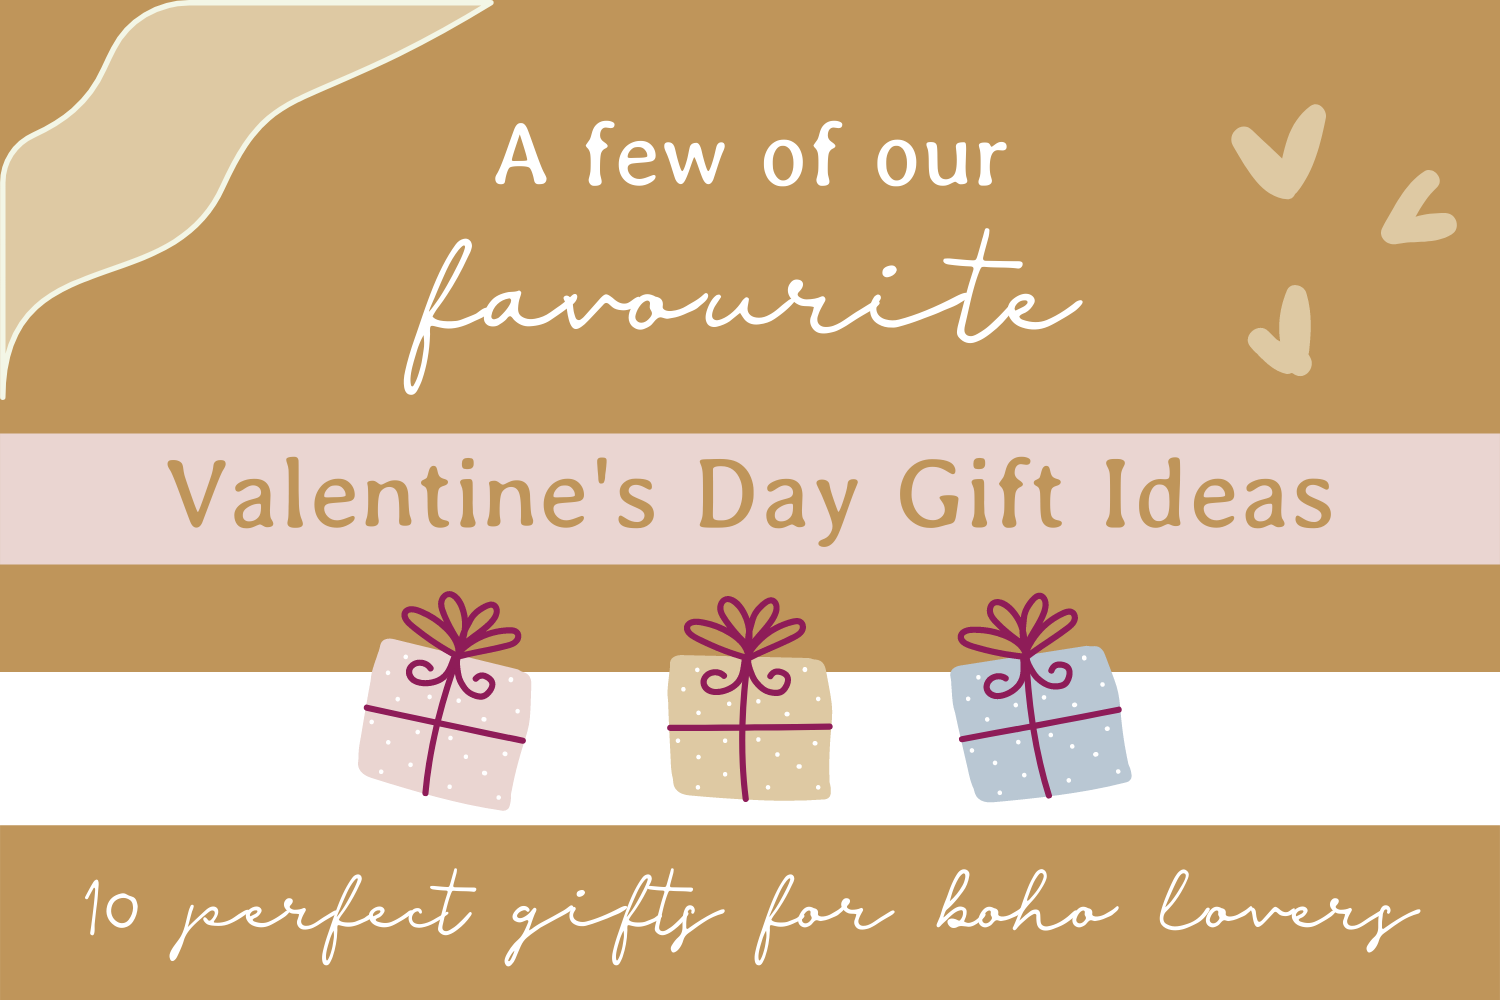 Our Top 10 Valentine's Day Gifts